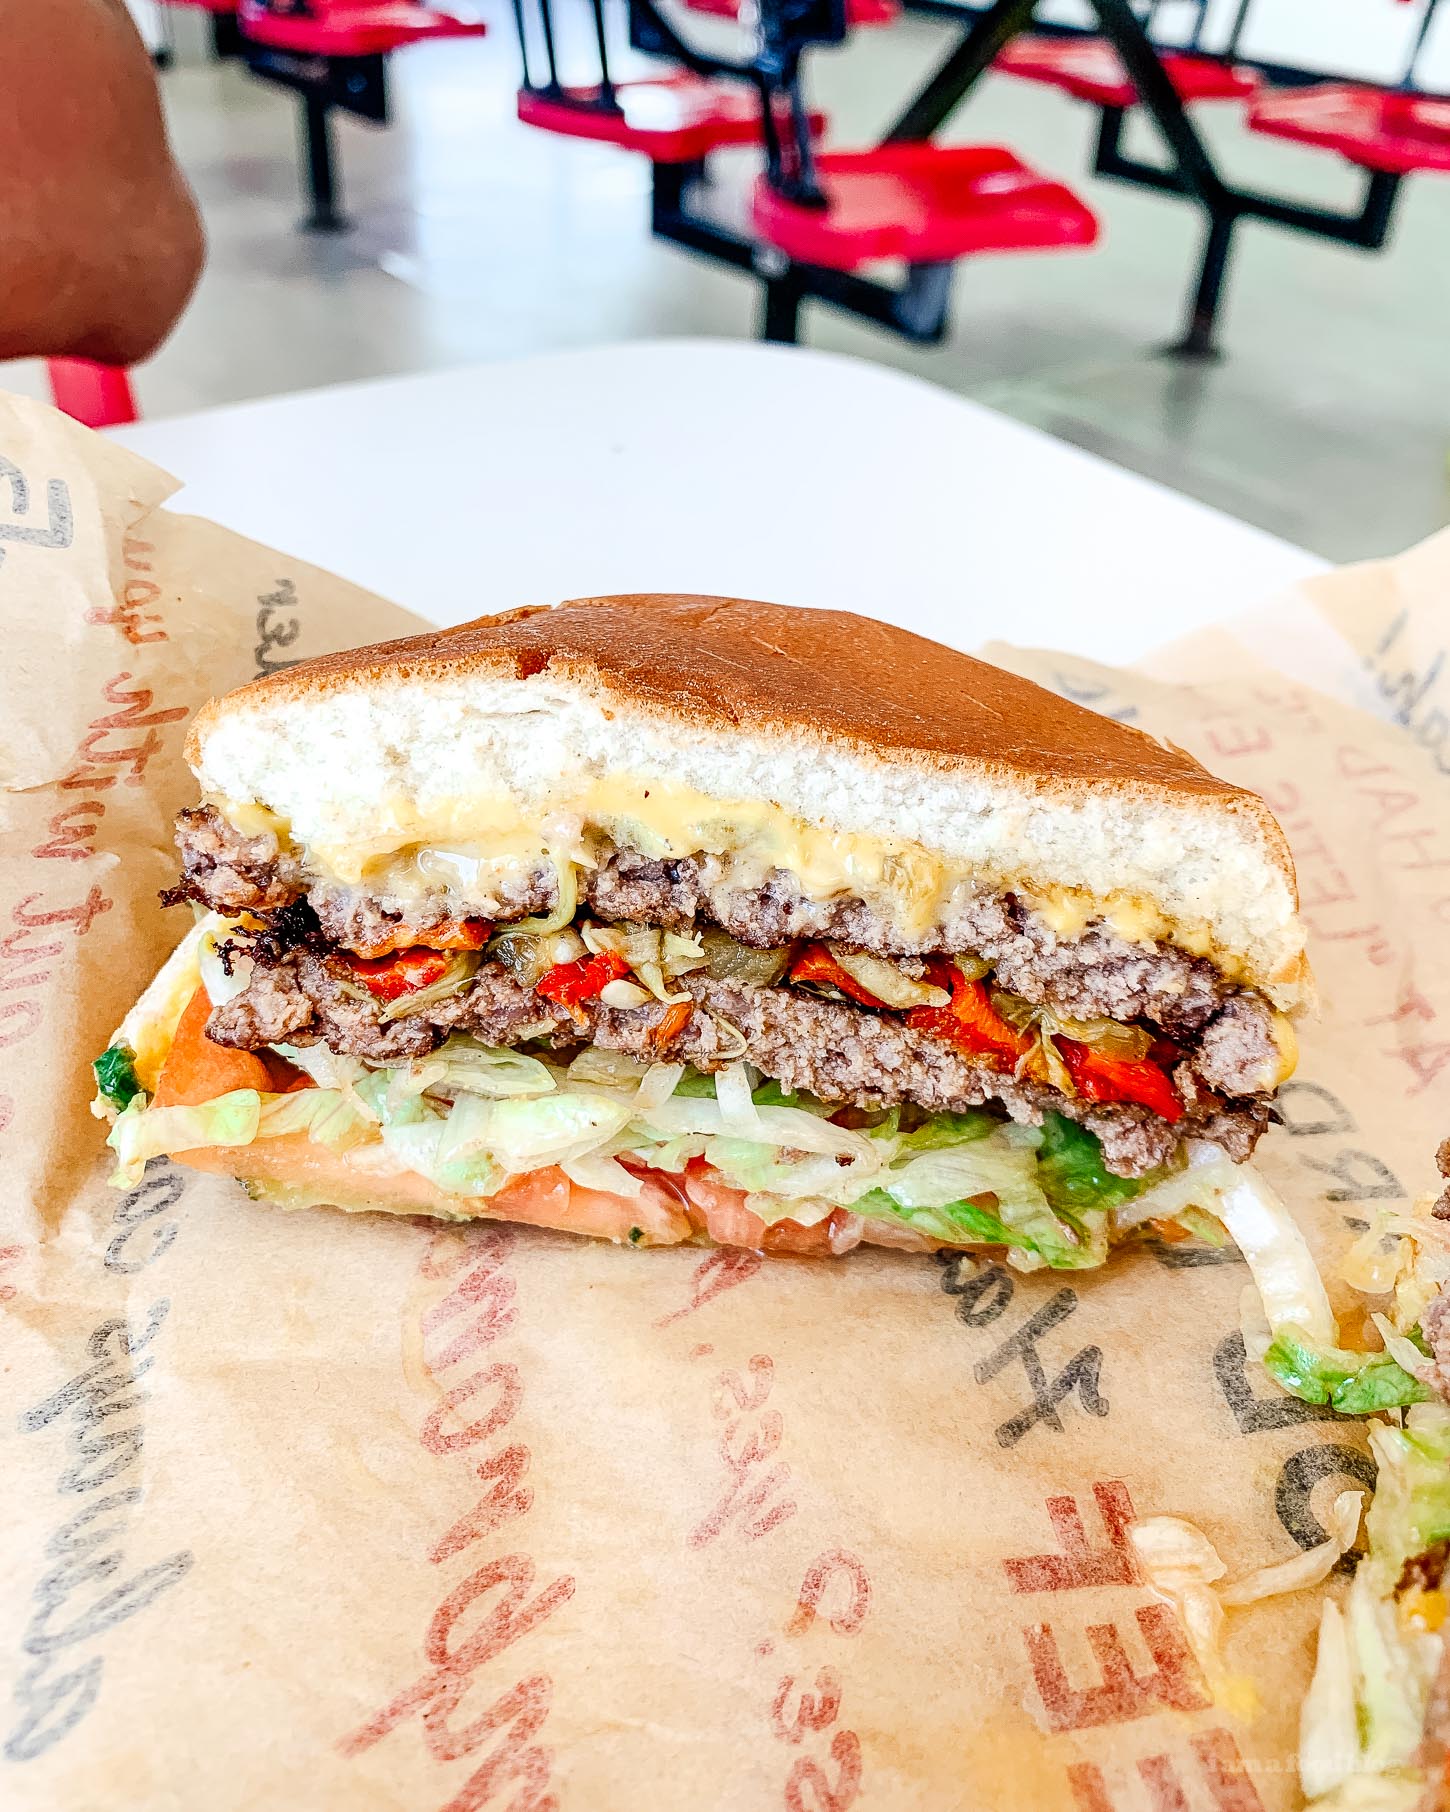 We went on the search for the best green chile cheeseburger in New Mexico #travel #newmexico #greenchile #greenchilecheeseburger #wheretoeat #wheretoeatnewmexico